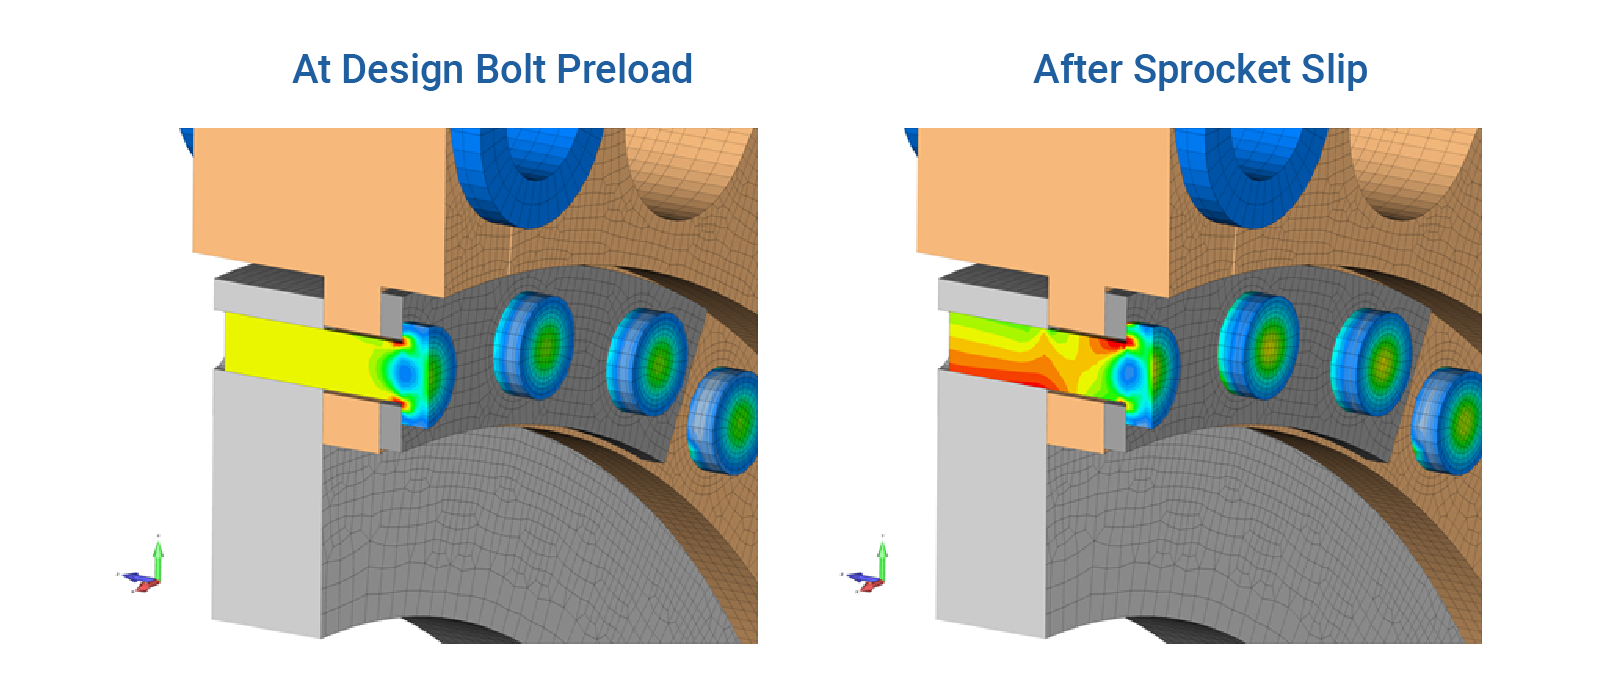 FEA bolt stress state at design condition is uniform with only stress peaks under the bolt head.  As slip occurs, the bolt stress state becomes non-uniform and its fatigue life is compromised - Fatigue Engineering Services - Digital Prototyping Complex Systems with Finite Element Analysis - Predictive Engineering